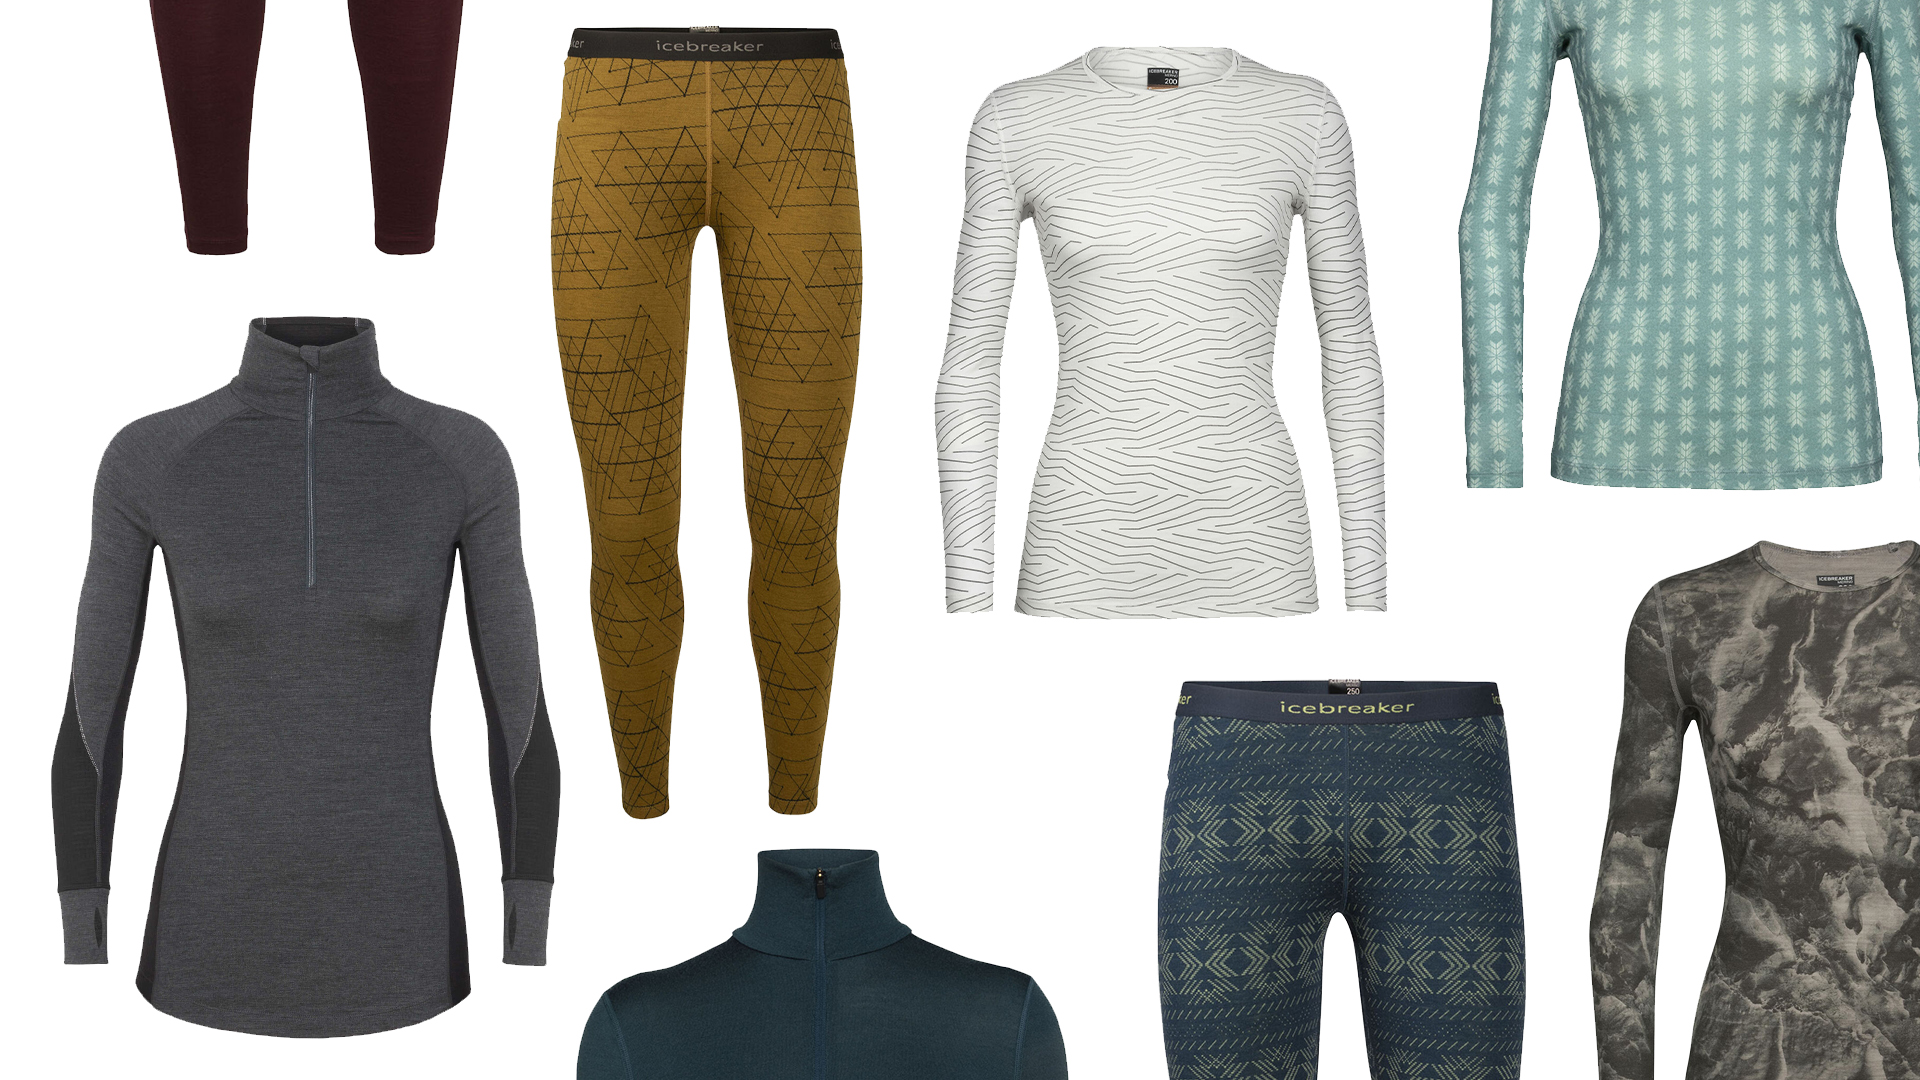 Assorted color and patterns of women's wool baselayers on a white background.